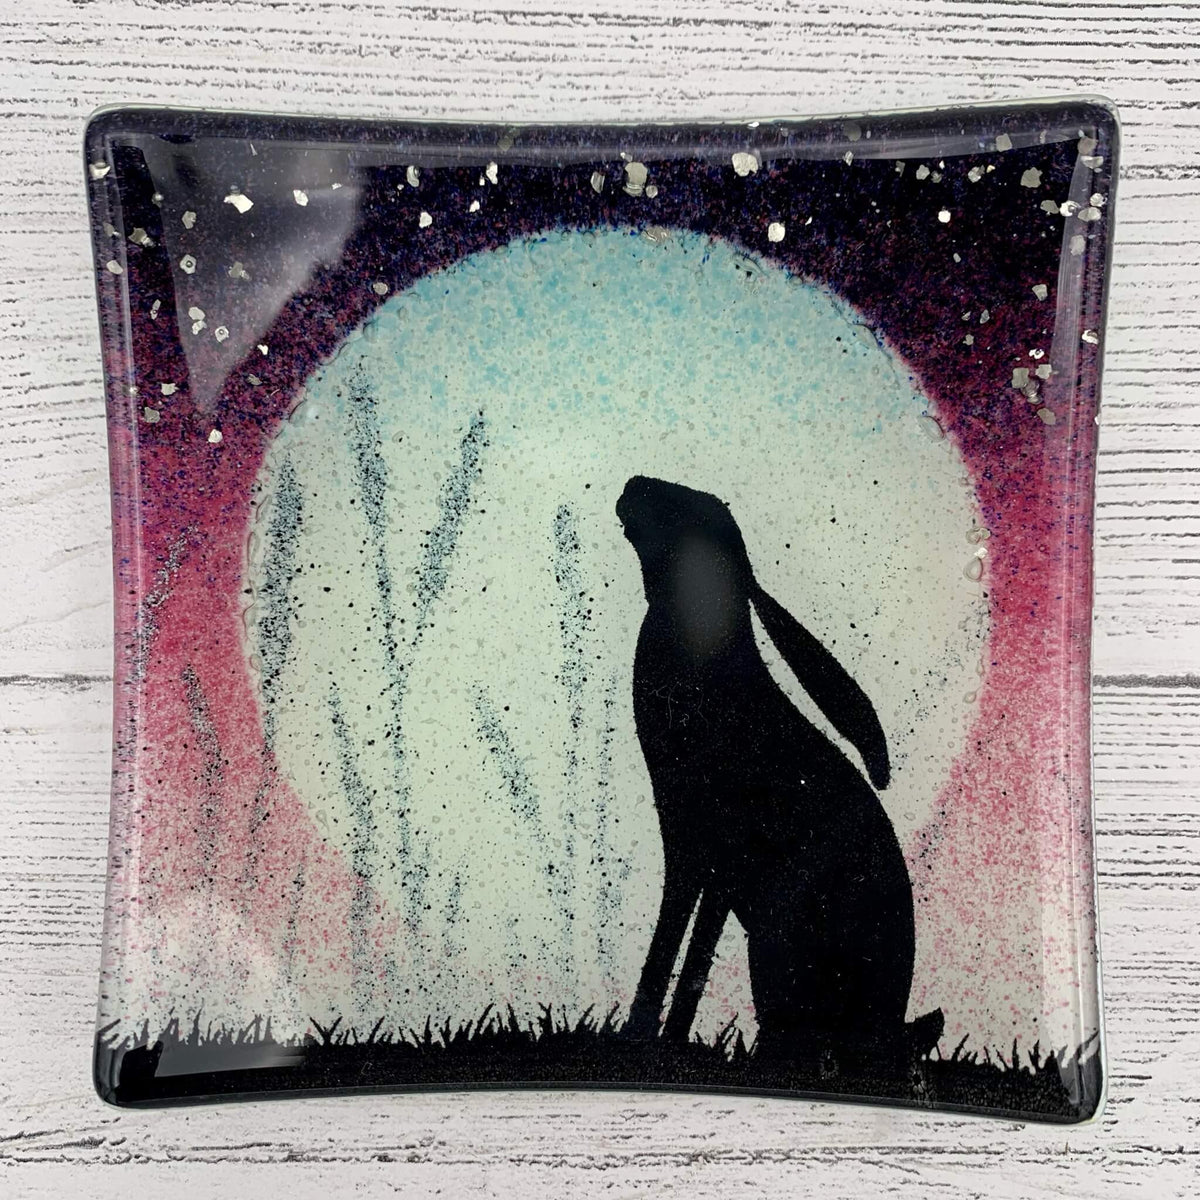 Handcrafted in the uk, fused glass jewellery dish in pink, with a hare silhouette, large moon and glitter for stars.